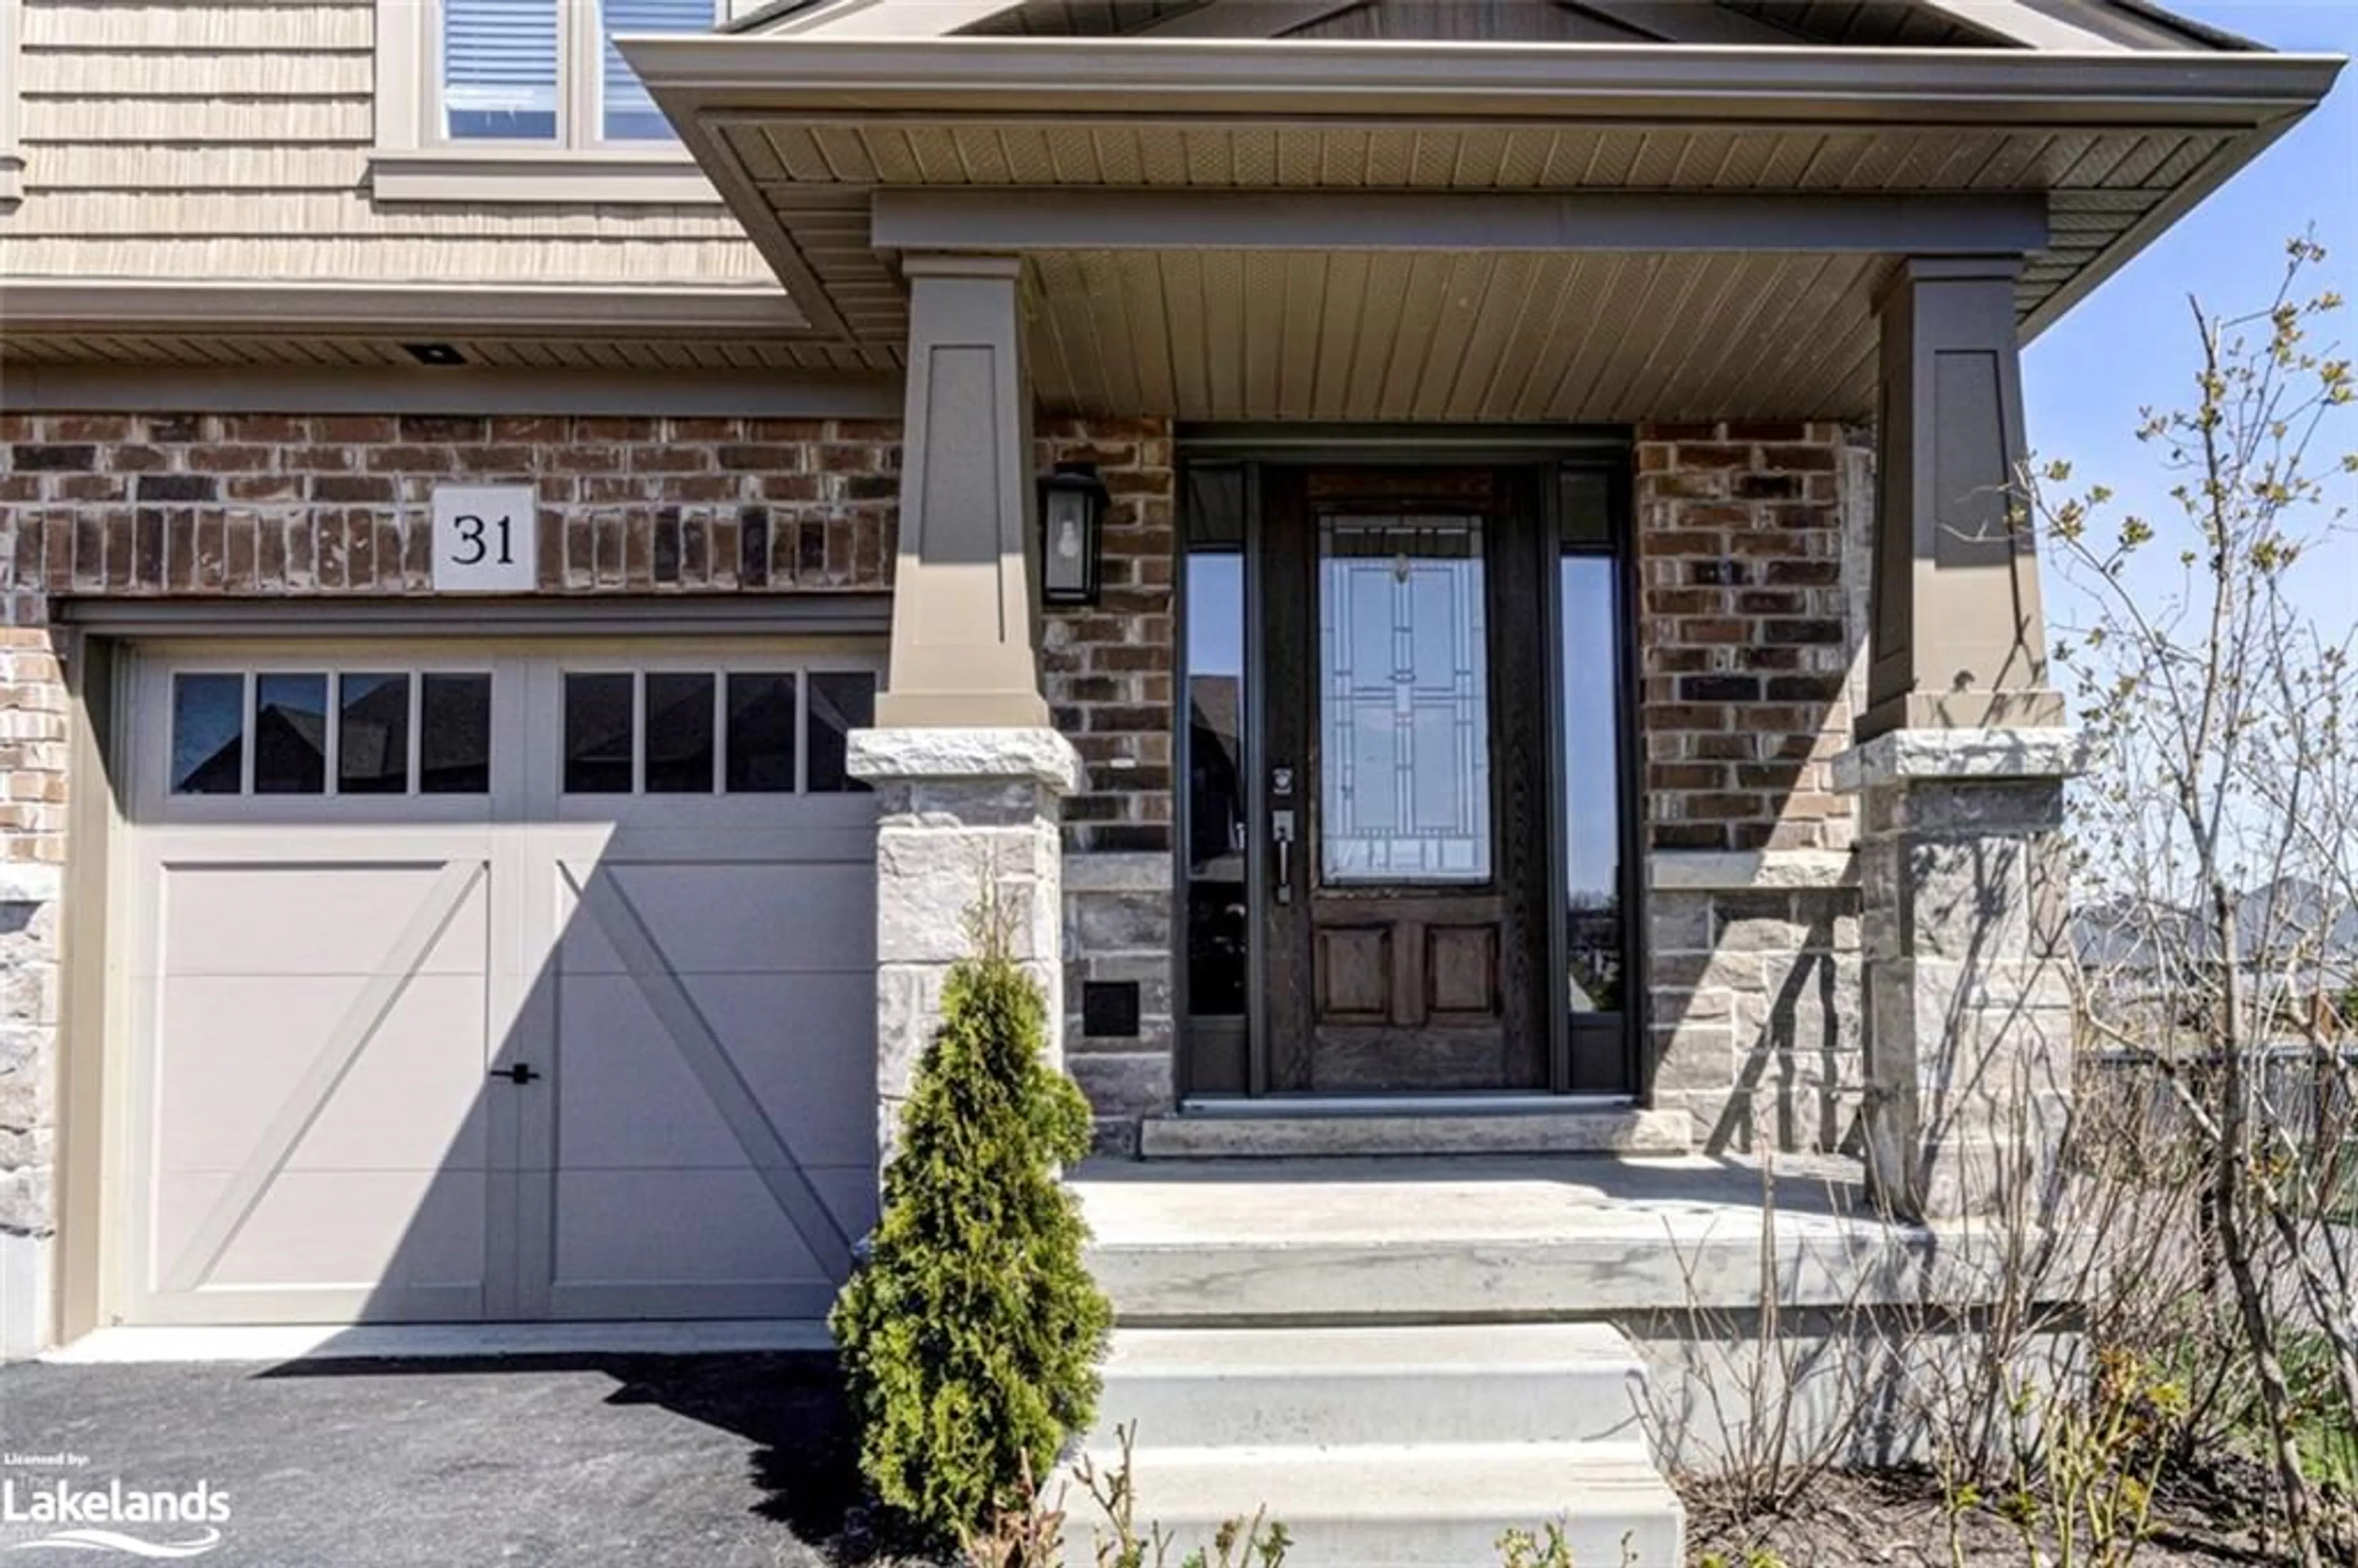 Home with brick exterior material for 31 Archer Ave, Collingwood Ontario L9Y 3B7